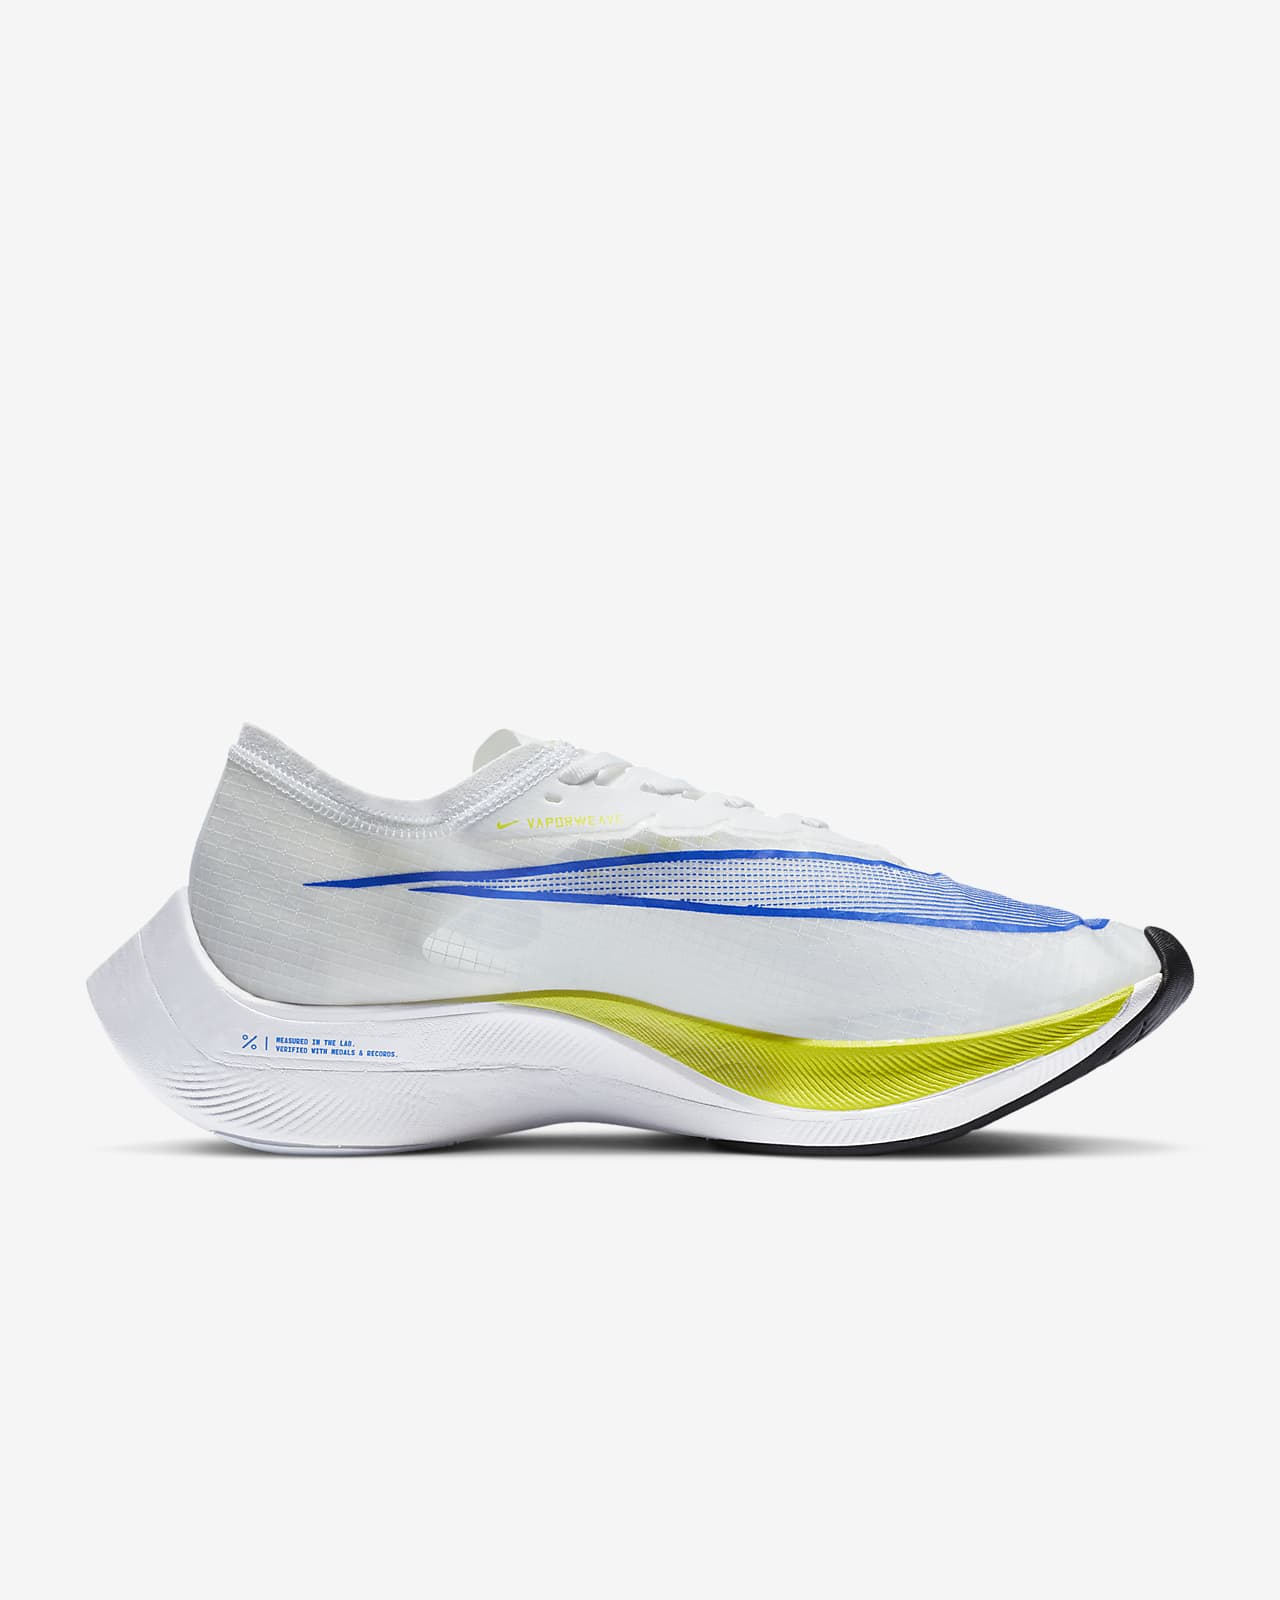 running shoes nike zoomx vaporfly next